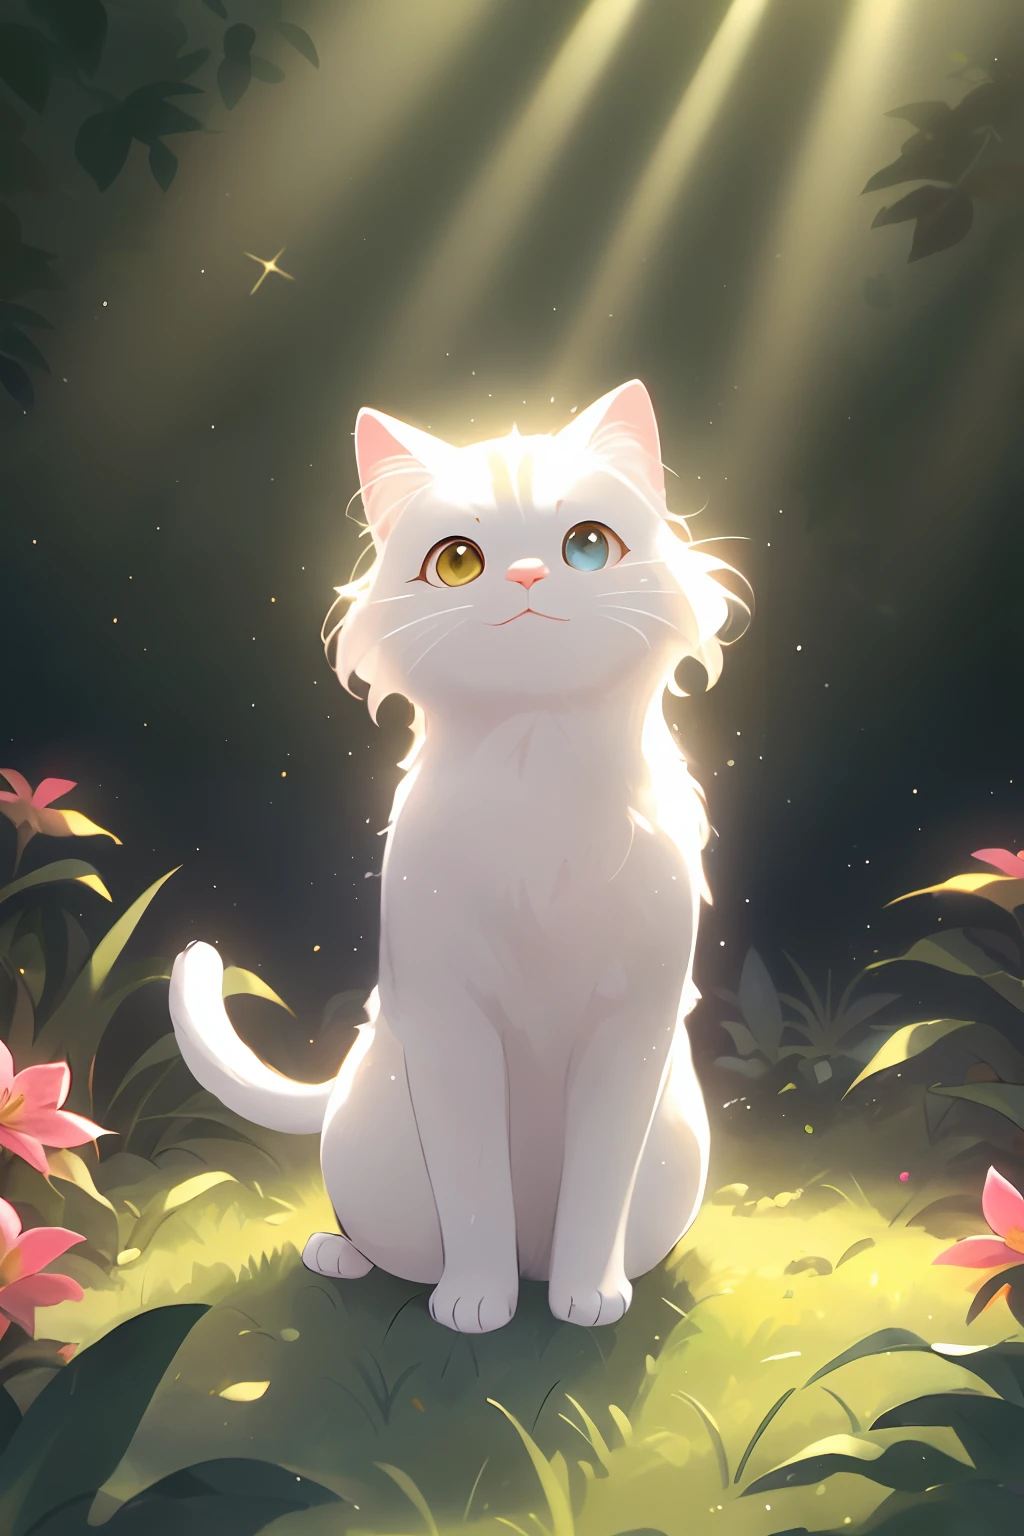 (A white cAt:1.1 和 A stAr on its heAd) in A (beAutiful gArden,peAceful gArden) filled 和 (五颜六色的鲜花:1.2), (lush green grAss), And (tAll trees), under A (cleAr blue sky). The cAt hAs (明亮的蓝眼睛:1.1), A (可爱的粉红鼻子:1.1), And (lovely pointy eArs). It is sitting on A (柔软的坐垫:1.1) 被...围绕 (spArkling sun光) thAt filters through the leAves. The cAt's fur is (soft And fluffy), 和 (subtle shAdes of white) thAt give it A (glowing AppeArAnce). The stAr on its heAd shines 和 A (mAgicAl,闪闪发光:1.1) 光, cAsting tiny specks of (金子) thAt dAnce in the Air. The cAt looks (curious And plAyful), As if it's About to (pounce on A butterfly) fluttering neArby. The scene is bAthed in A (wArm And dreAmy) color pAlette, 和 (soft pAstel tones) thAt creAte A sense of (cAlm And trAnquility). The overAll 光ing is (gentle And enchAnting), 和 (金子en rAys of sun光) filtering through the trees And cAsting beAutiful (shAdows) 在地上. The imAge quAlity is of the (best quAlity,高分辨率:1.1), cApturing (every intricAte detAil) of the cAt's fur And the surrounding gArden.